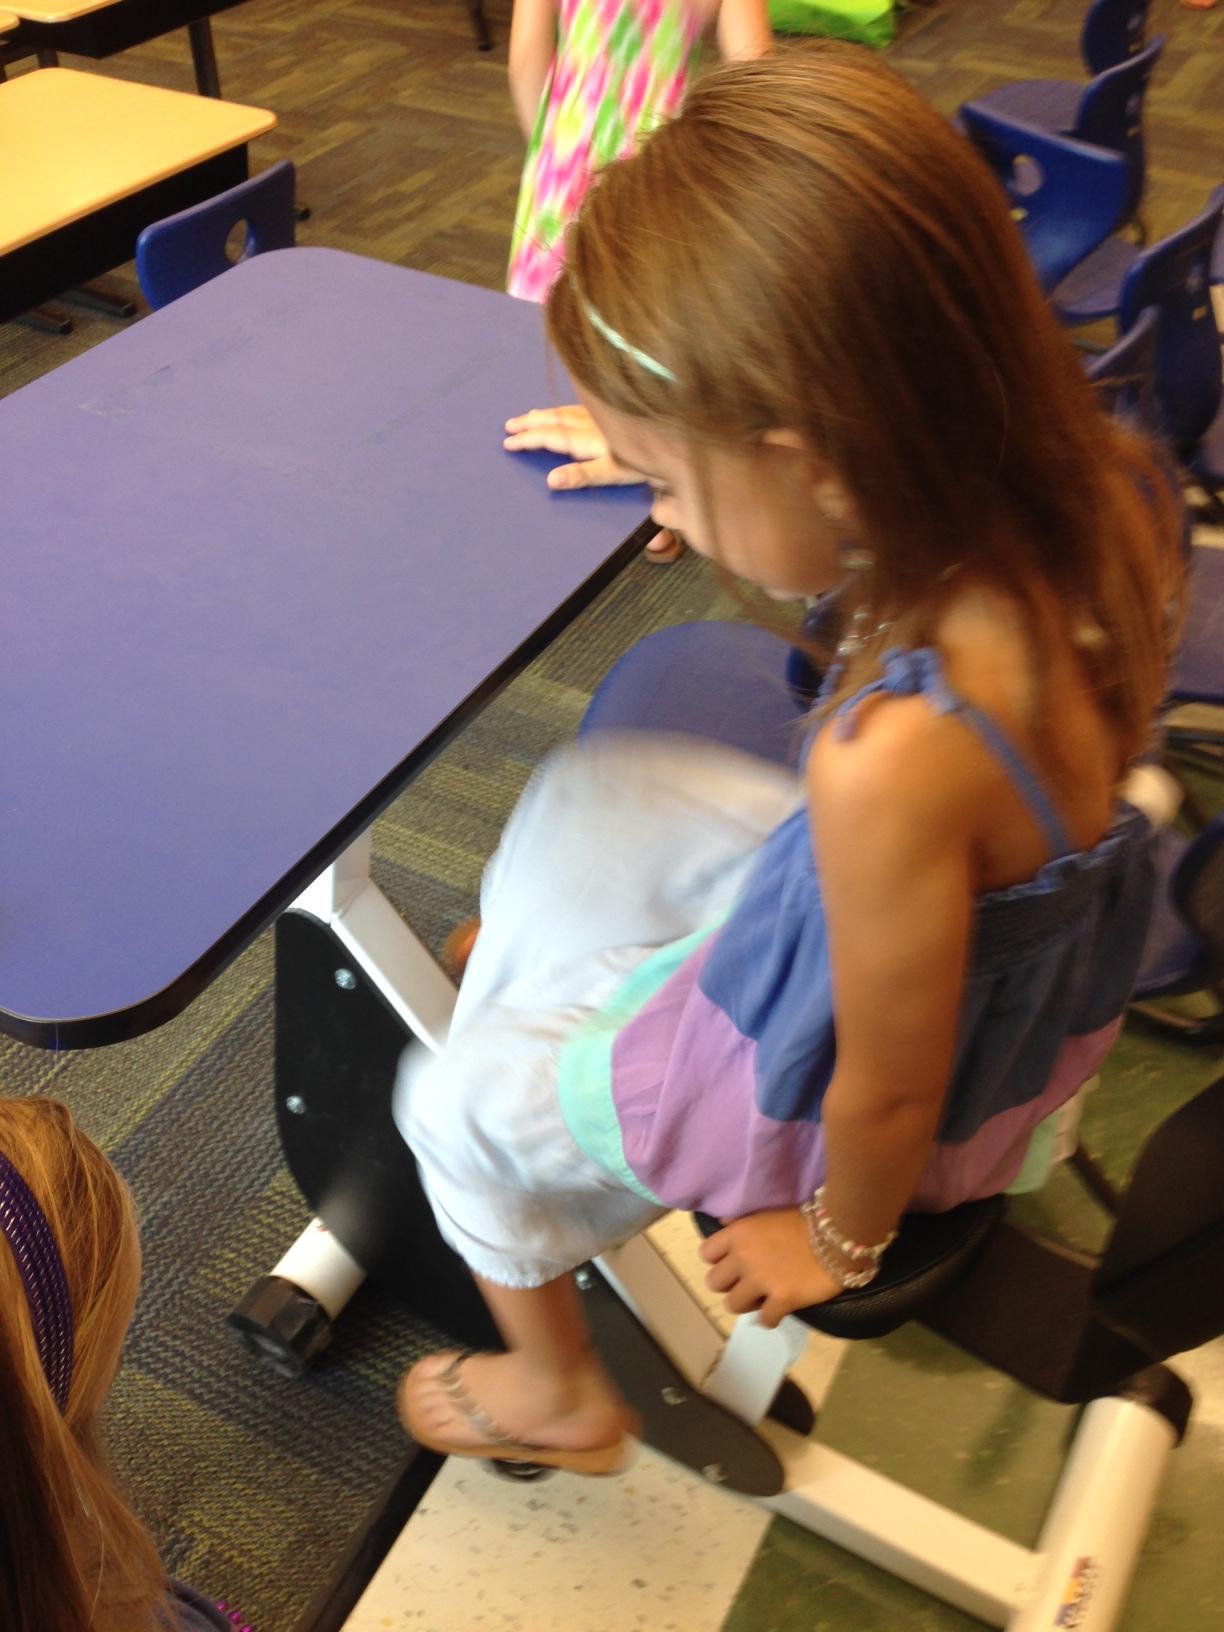 This first grade classroom has desks with pedals so kids can move while learning.